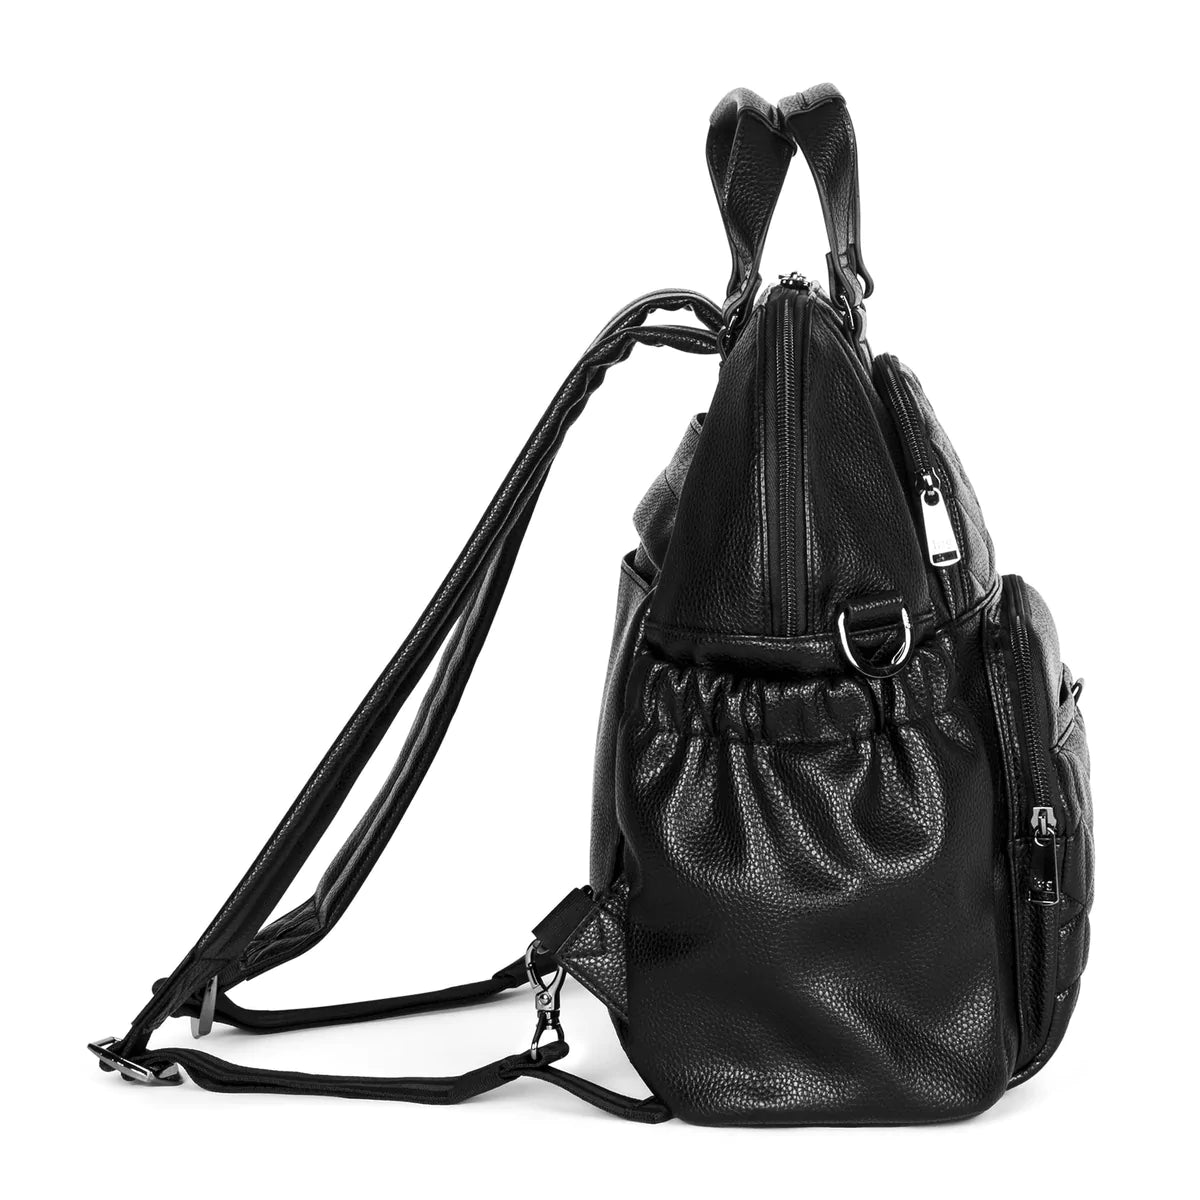 Lug Classic VL Convertible Backpack - Canter ,Black